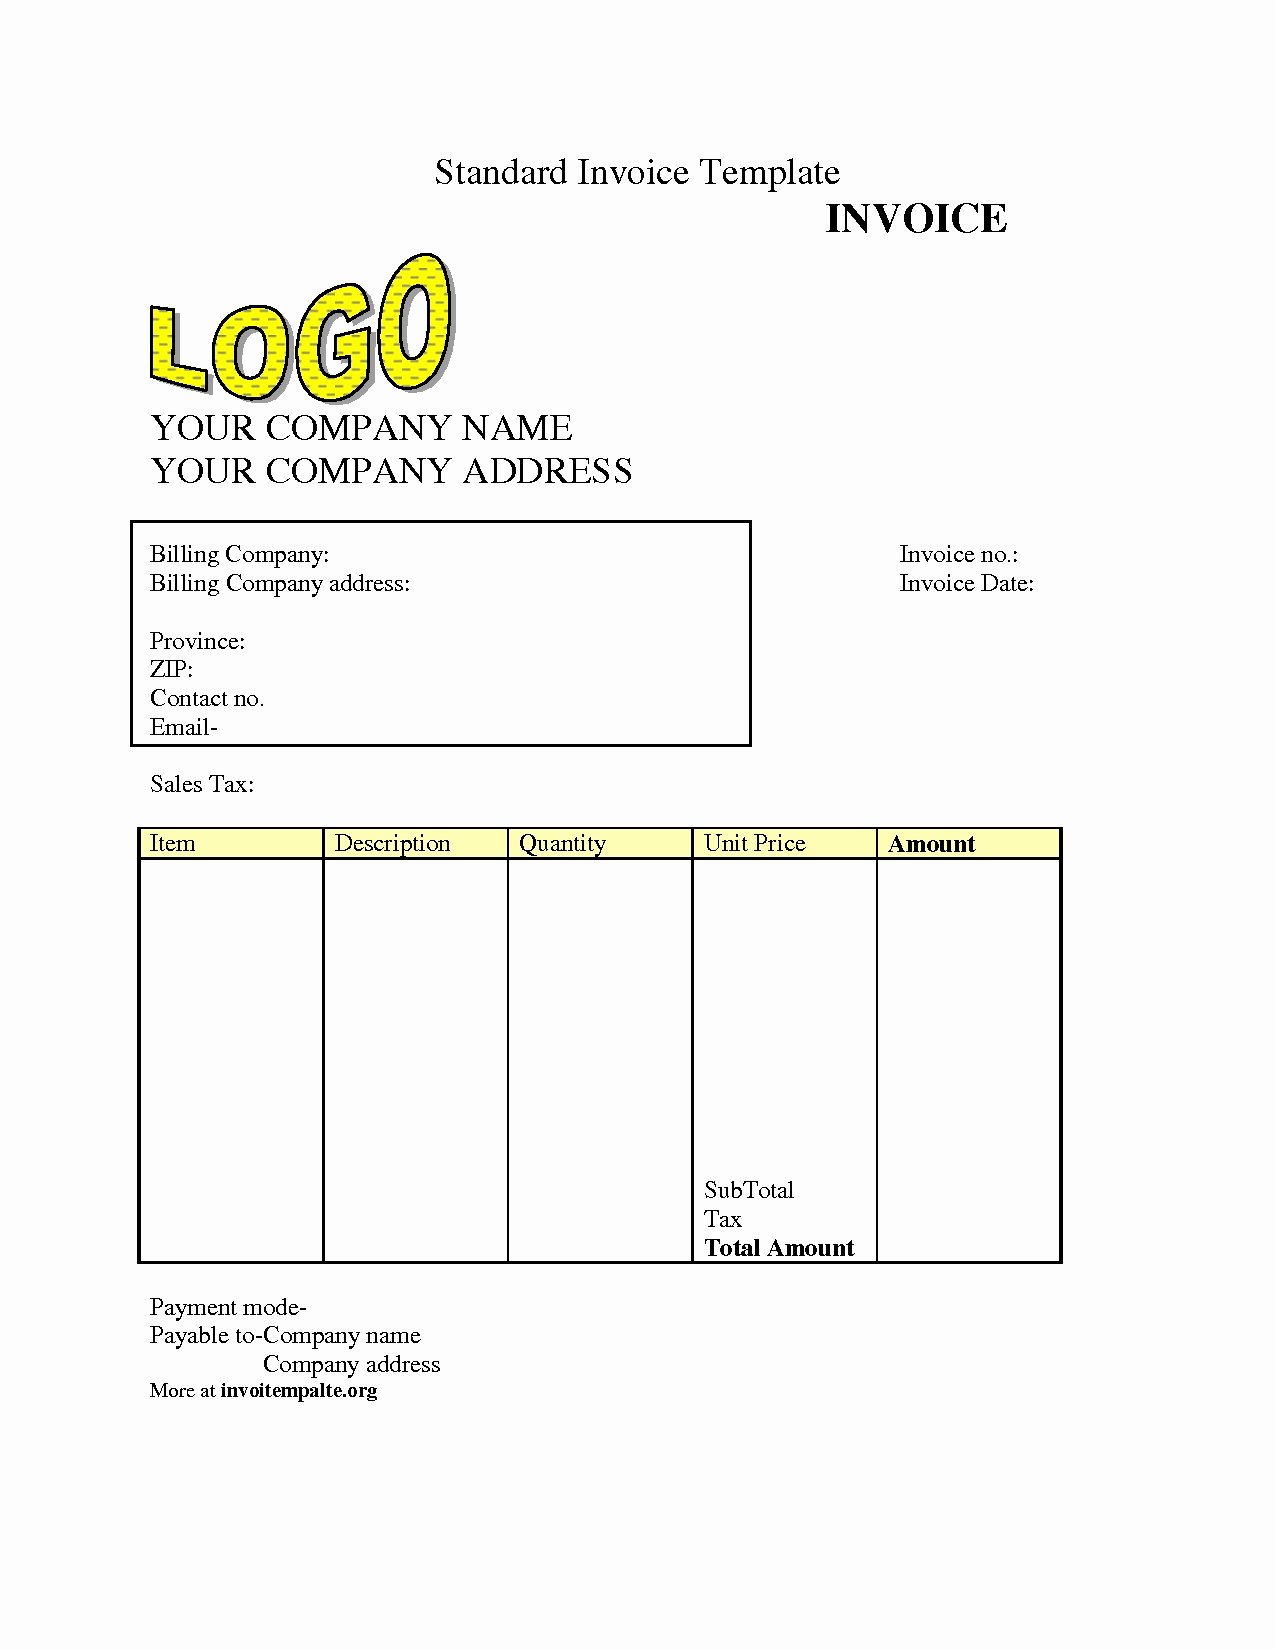 Free Invoice Template Downloads Invoice Template Ideas